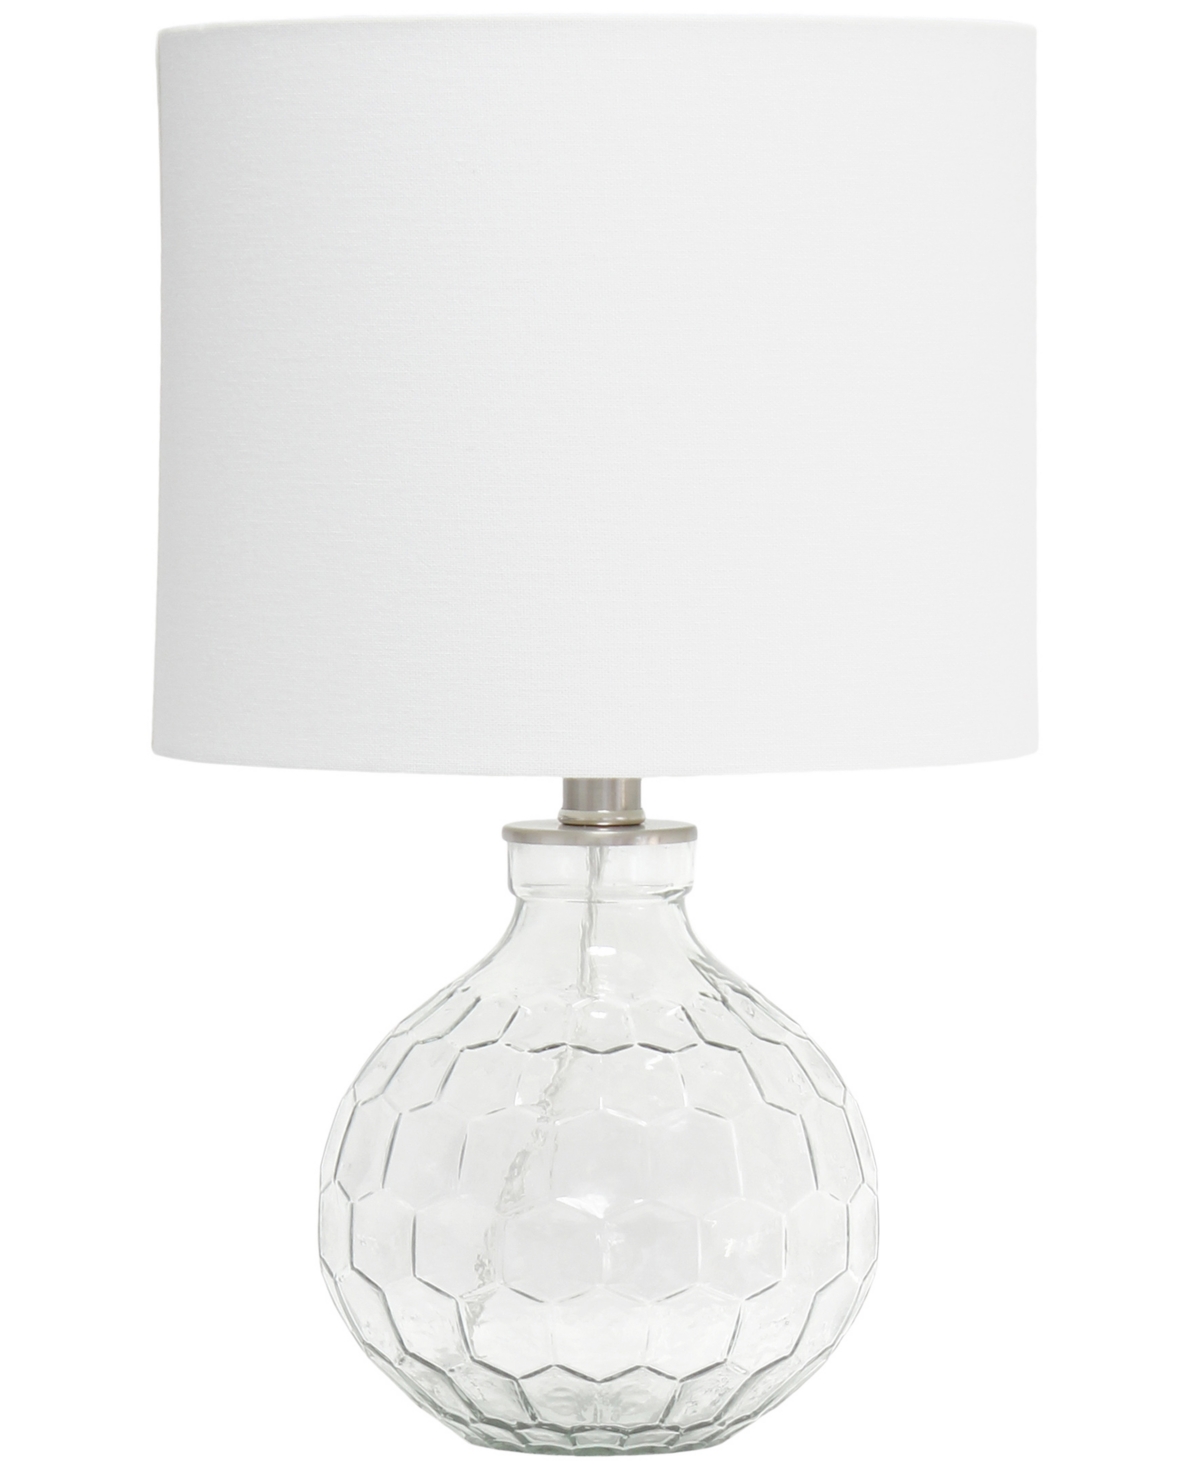 All The Rages 17.75" Contemporary Engraved Honeycomb Glass Table Desk Lamp With White Fabric Shade In Clearglass